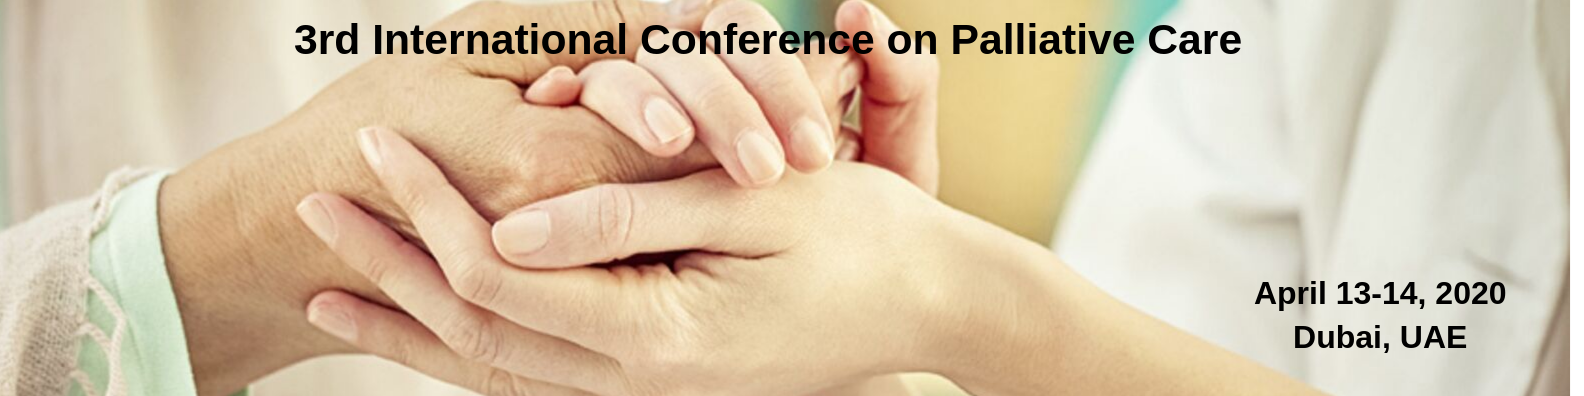 3rd International Conference on Palliative Care